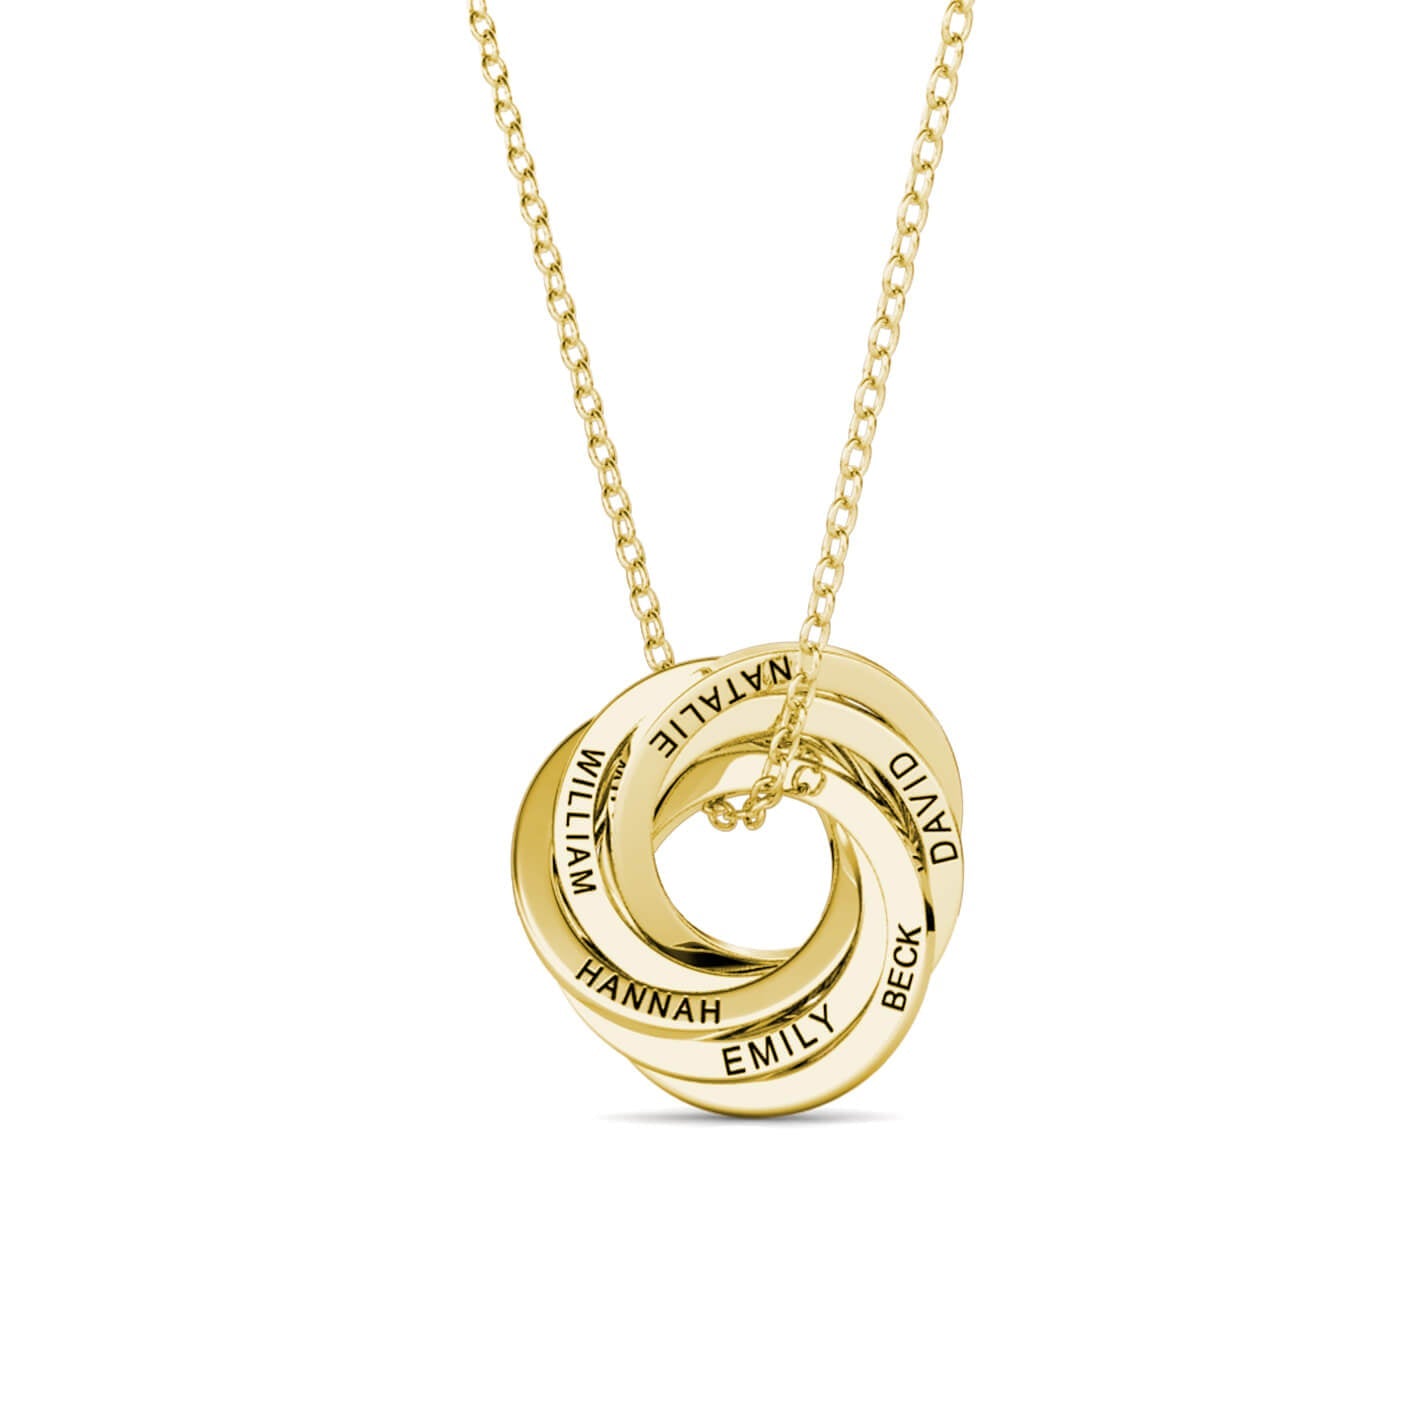 4 Russian Rings Necklace in 10k Yellow Gold - MYKA